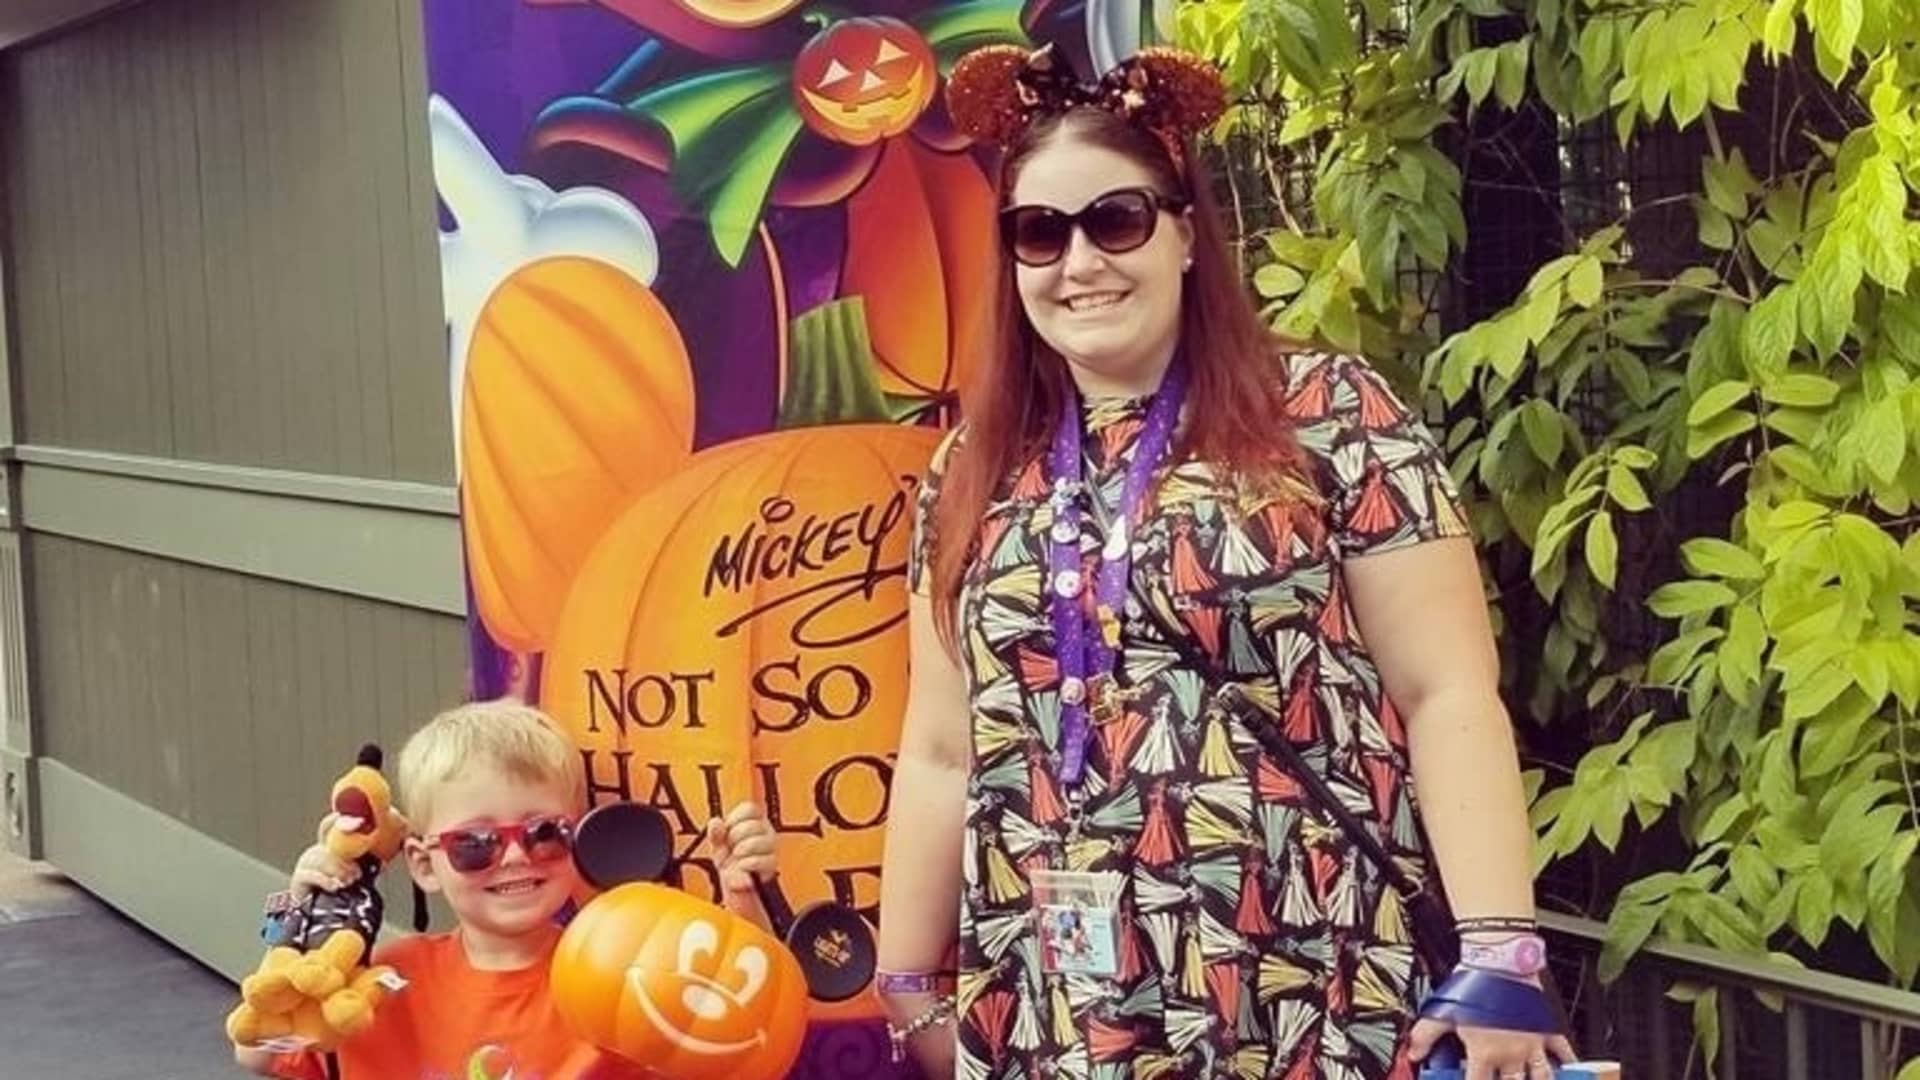 Krissy Reynolds, 35, and son Cayson, 8, celebrate at Mickey's Not-So-Scary Halloween Party in Orlando, Florida.